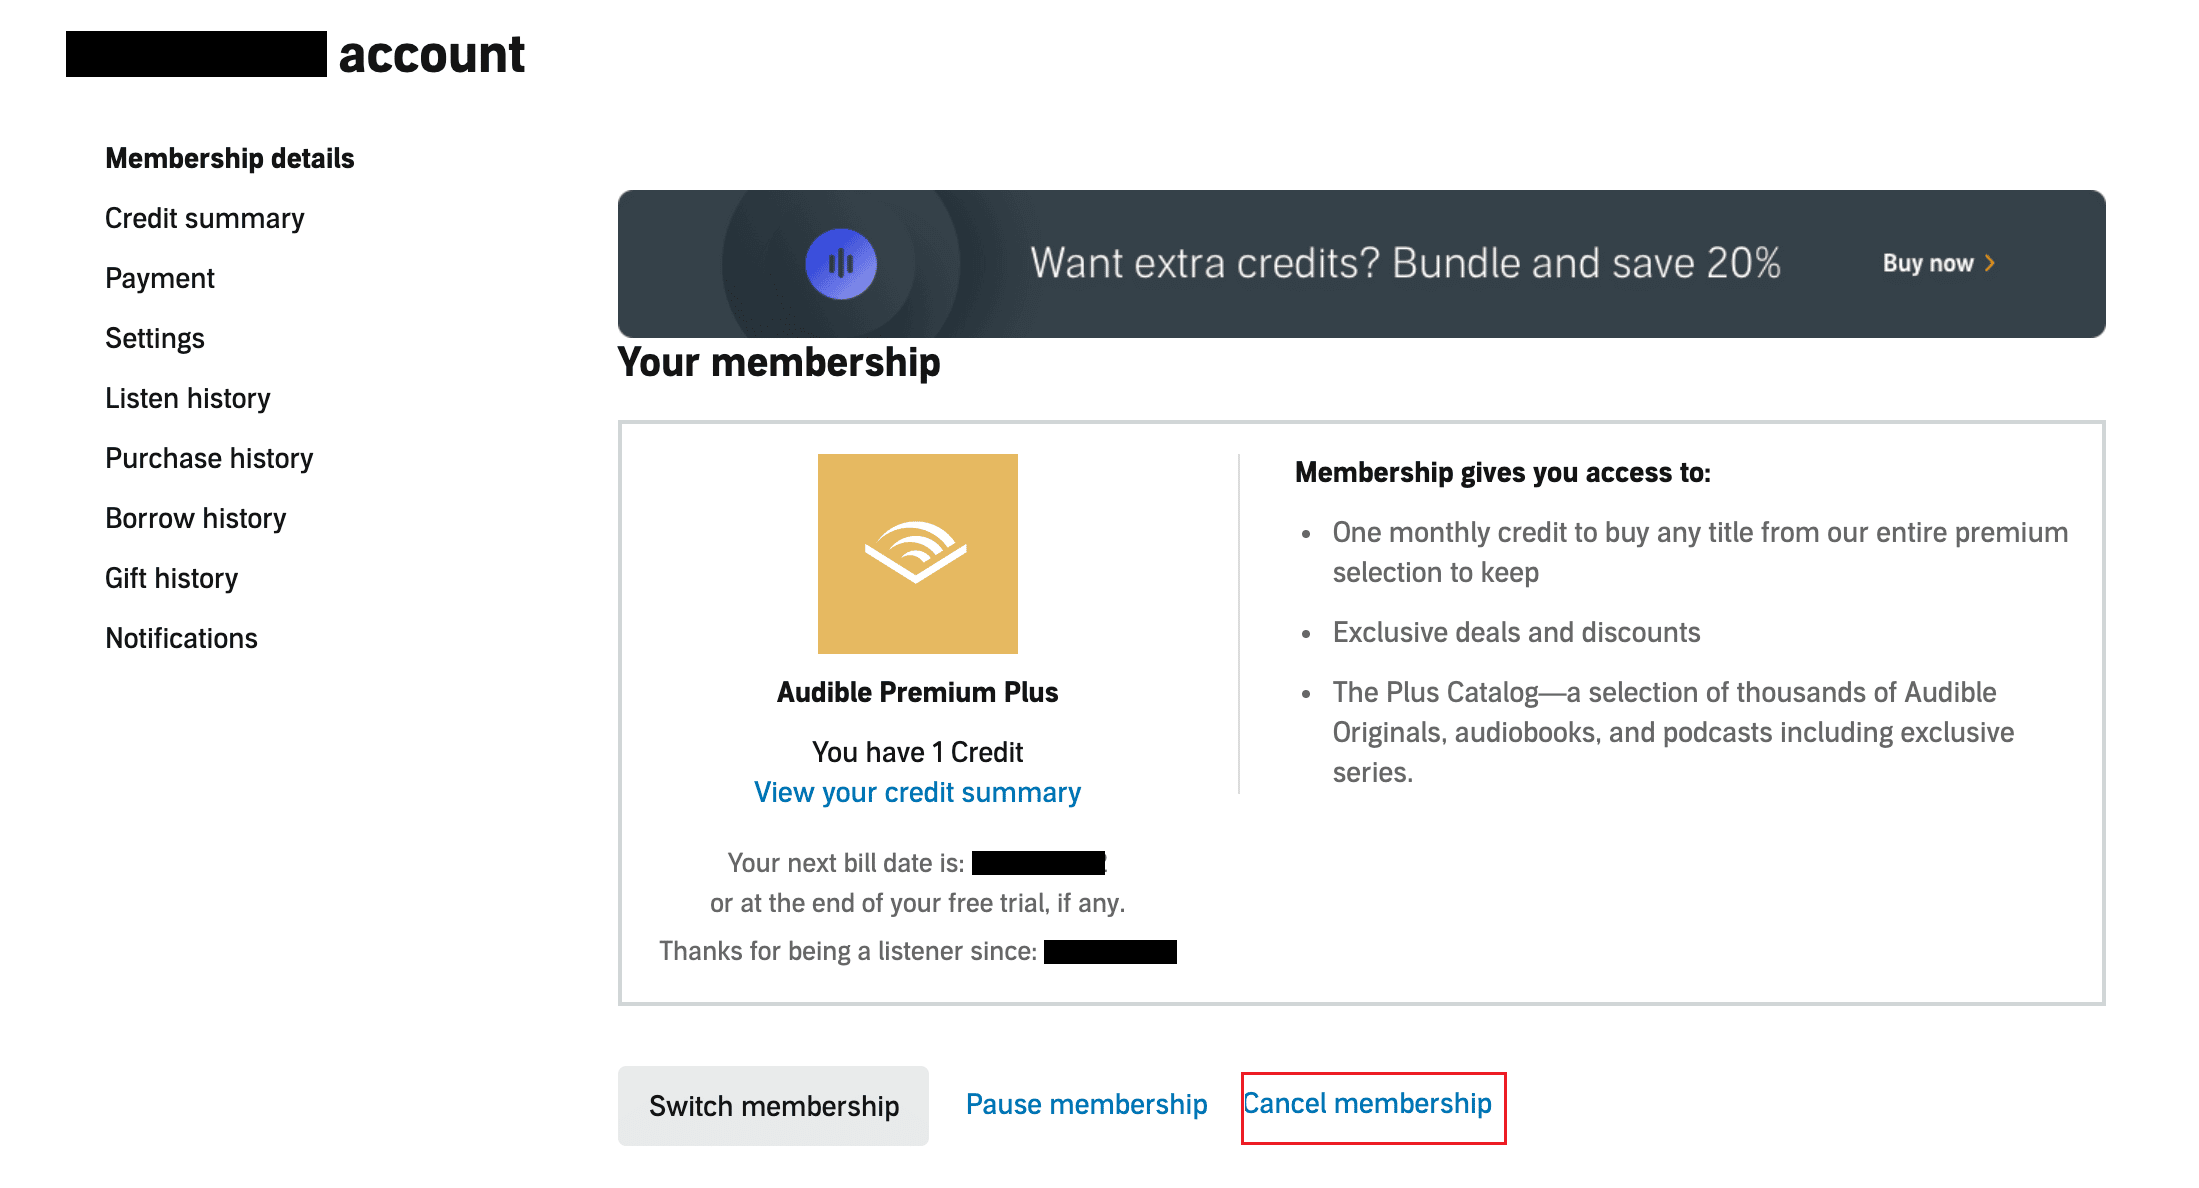 Click on Cancel membership from the bottom of the membership page